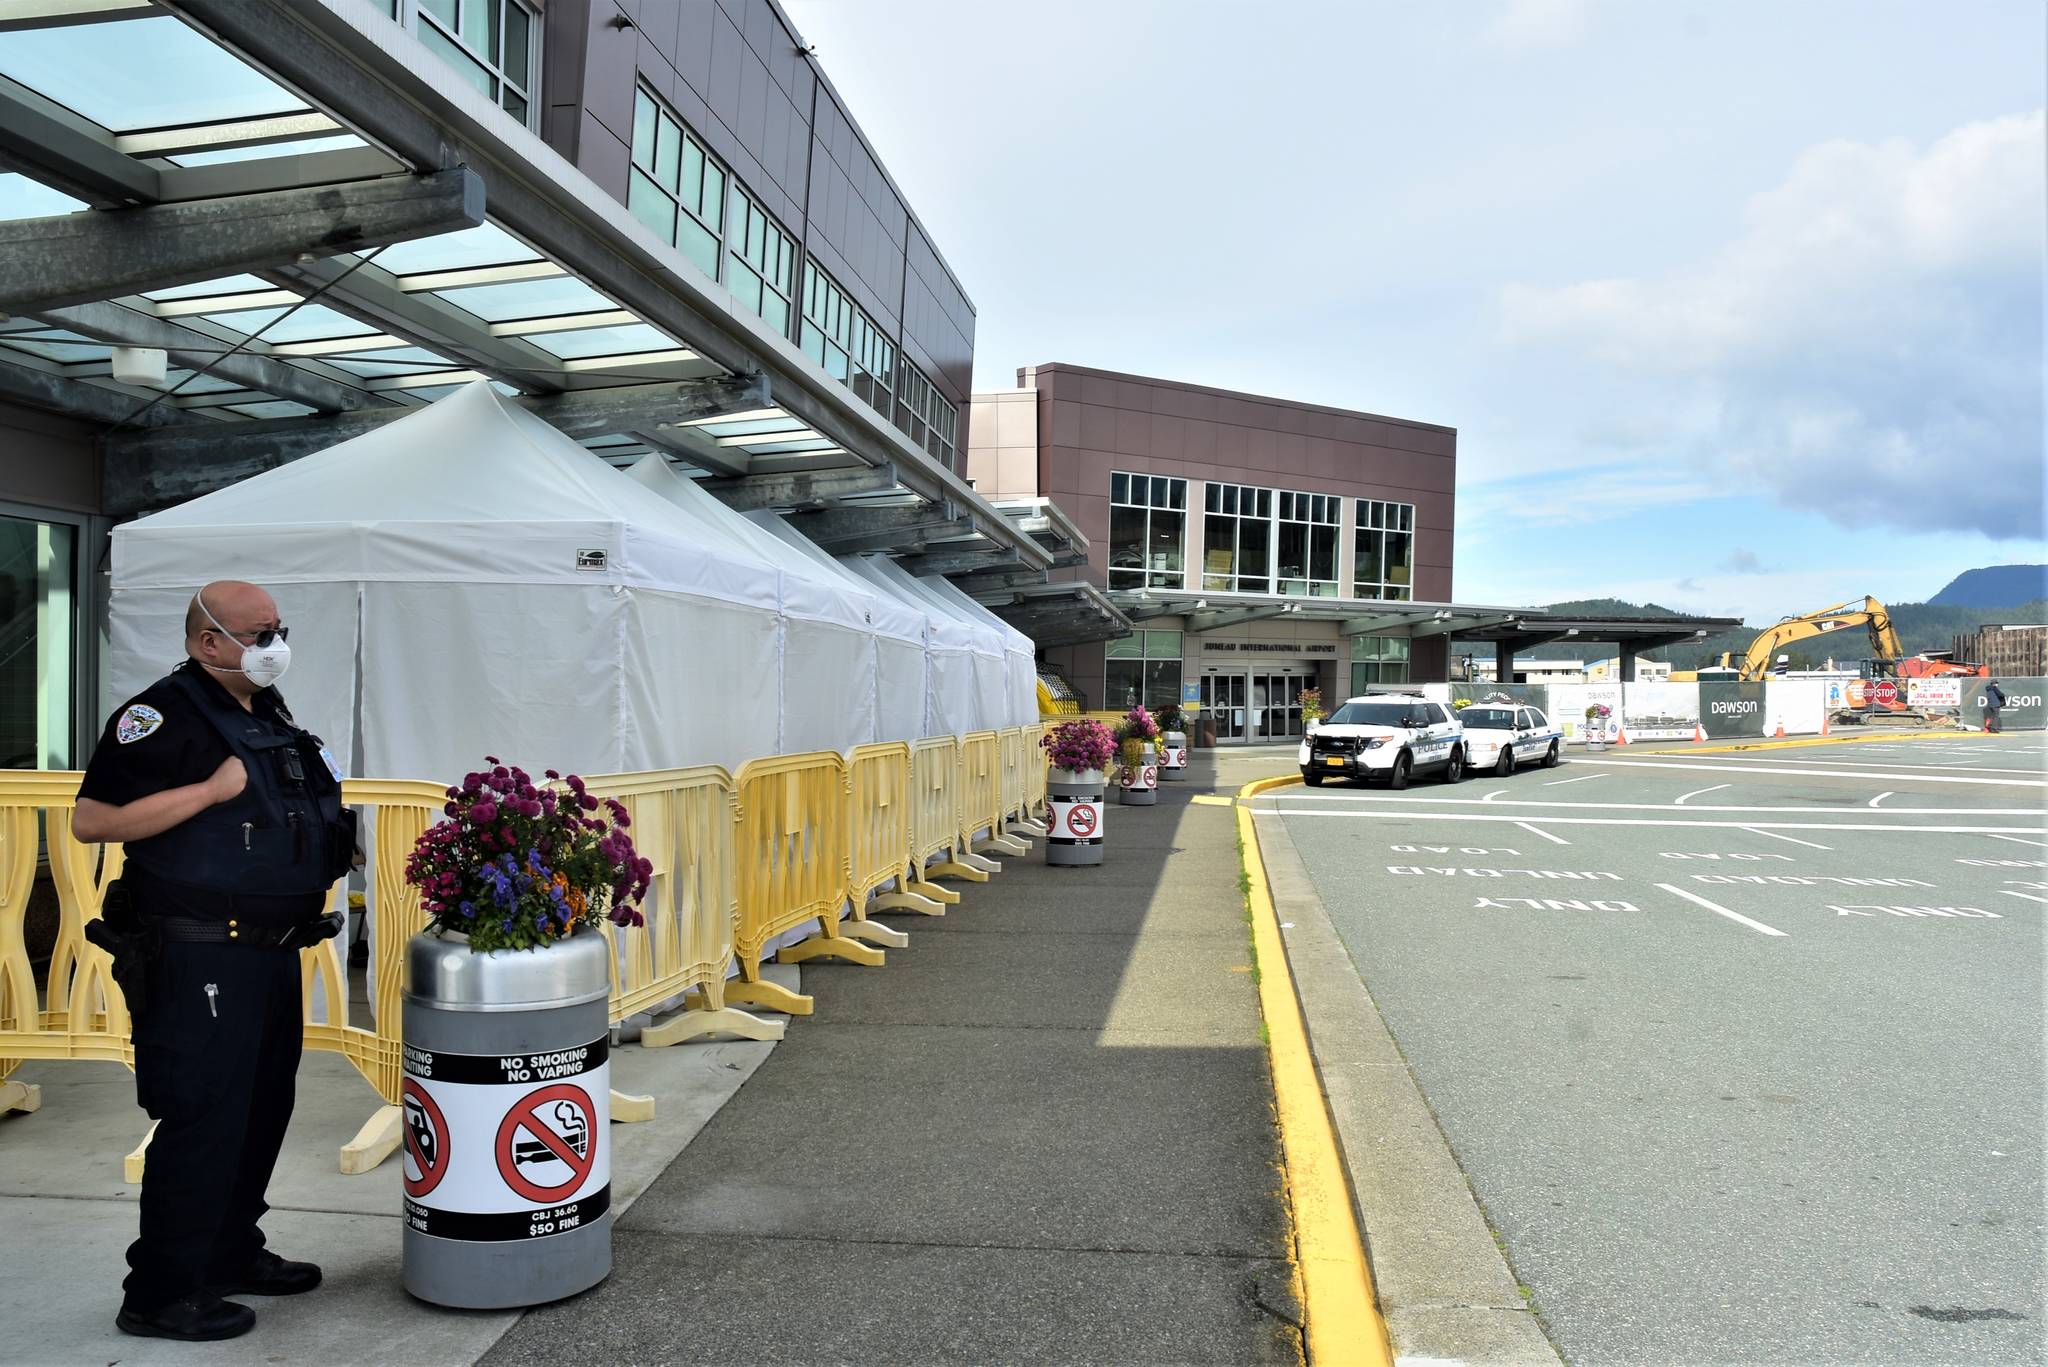 A Juneau Police Department officer at the Juneau International Airport on Tuesday, July 28, 2020. Nonresident out-of-state arrivals will have to provide negative COVID-19-test results under a revised travel mandate from Gov. Mike Dunleavy. (Peter Segall / Juneau Empire)